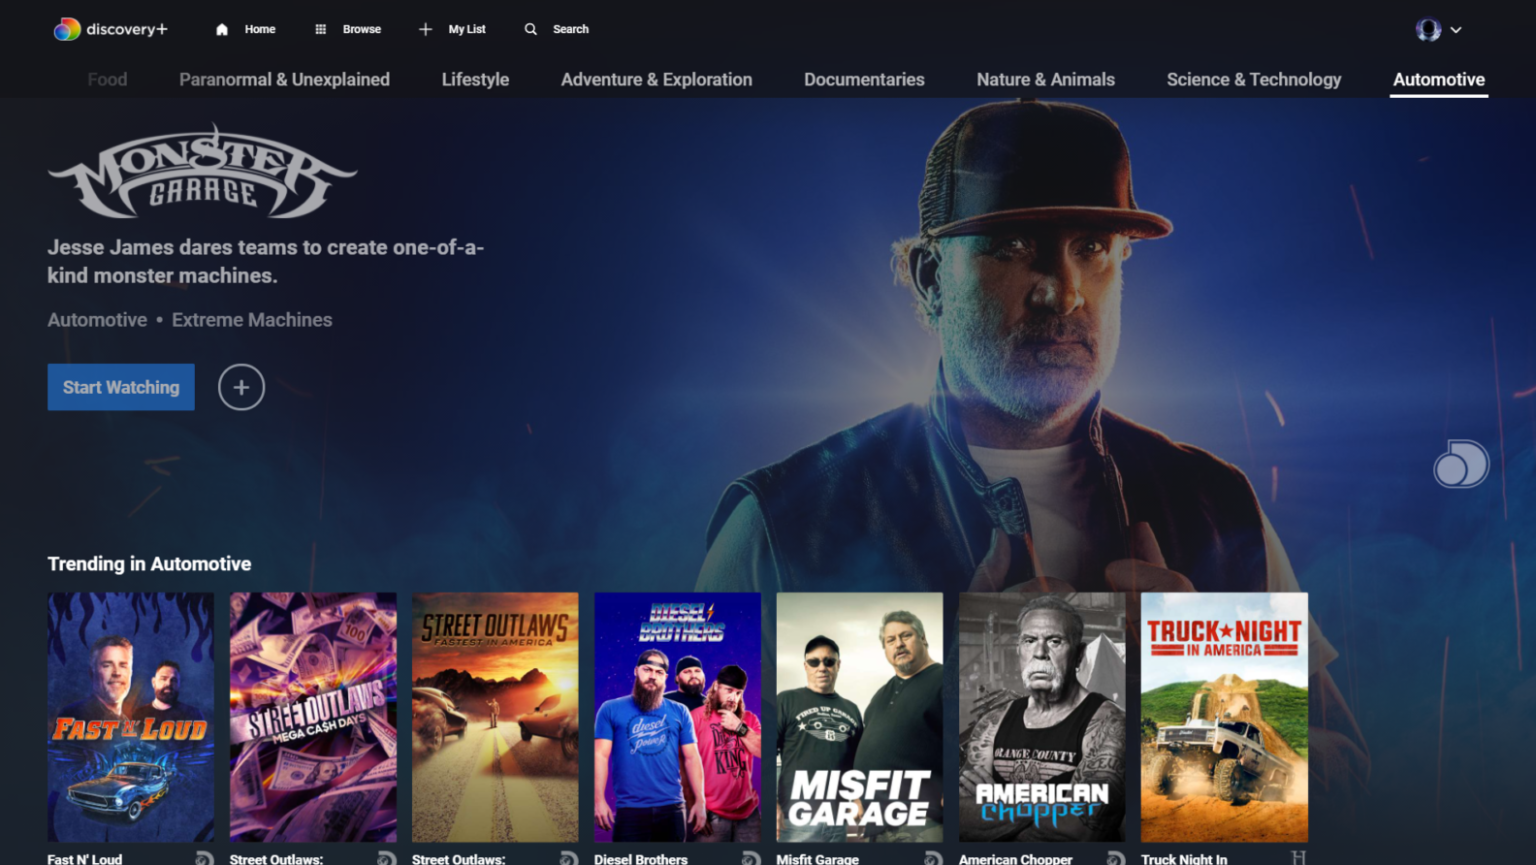 discovery plus promo code march 2021